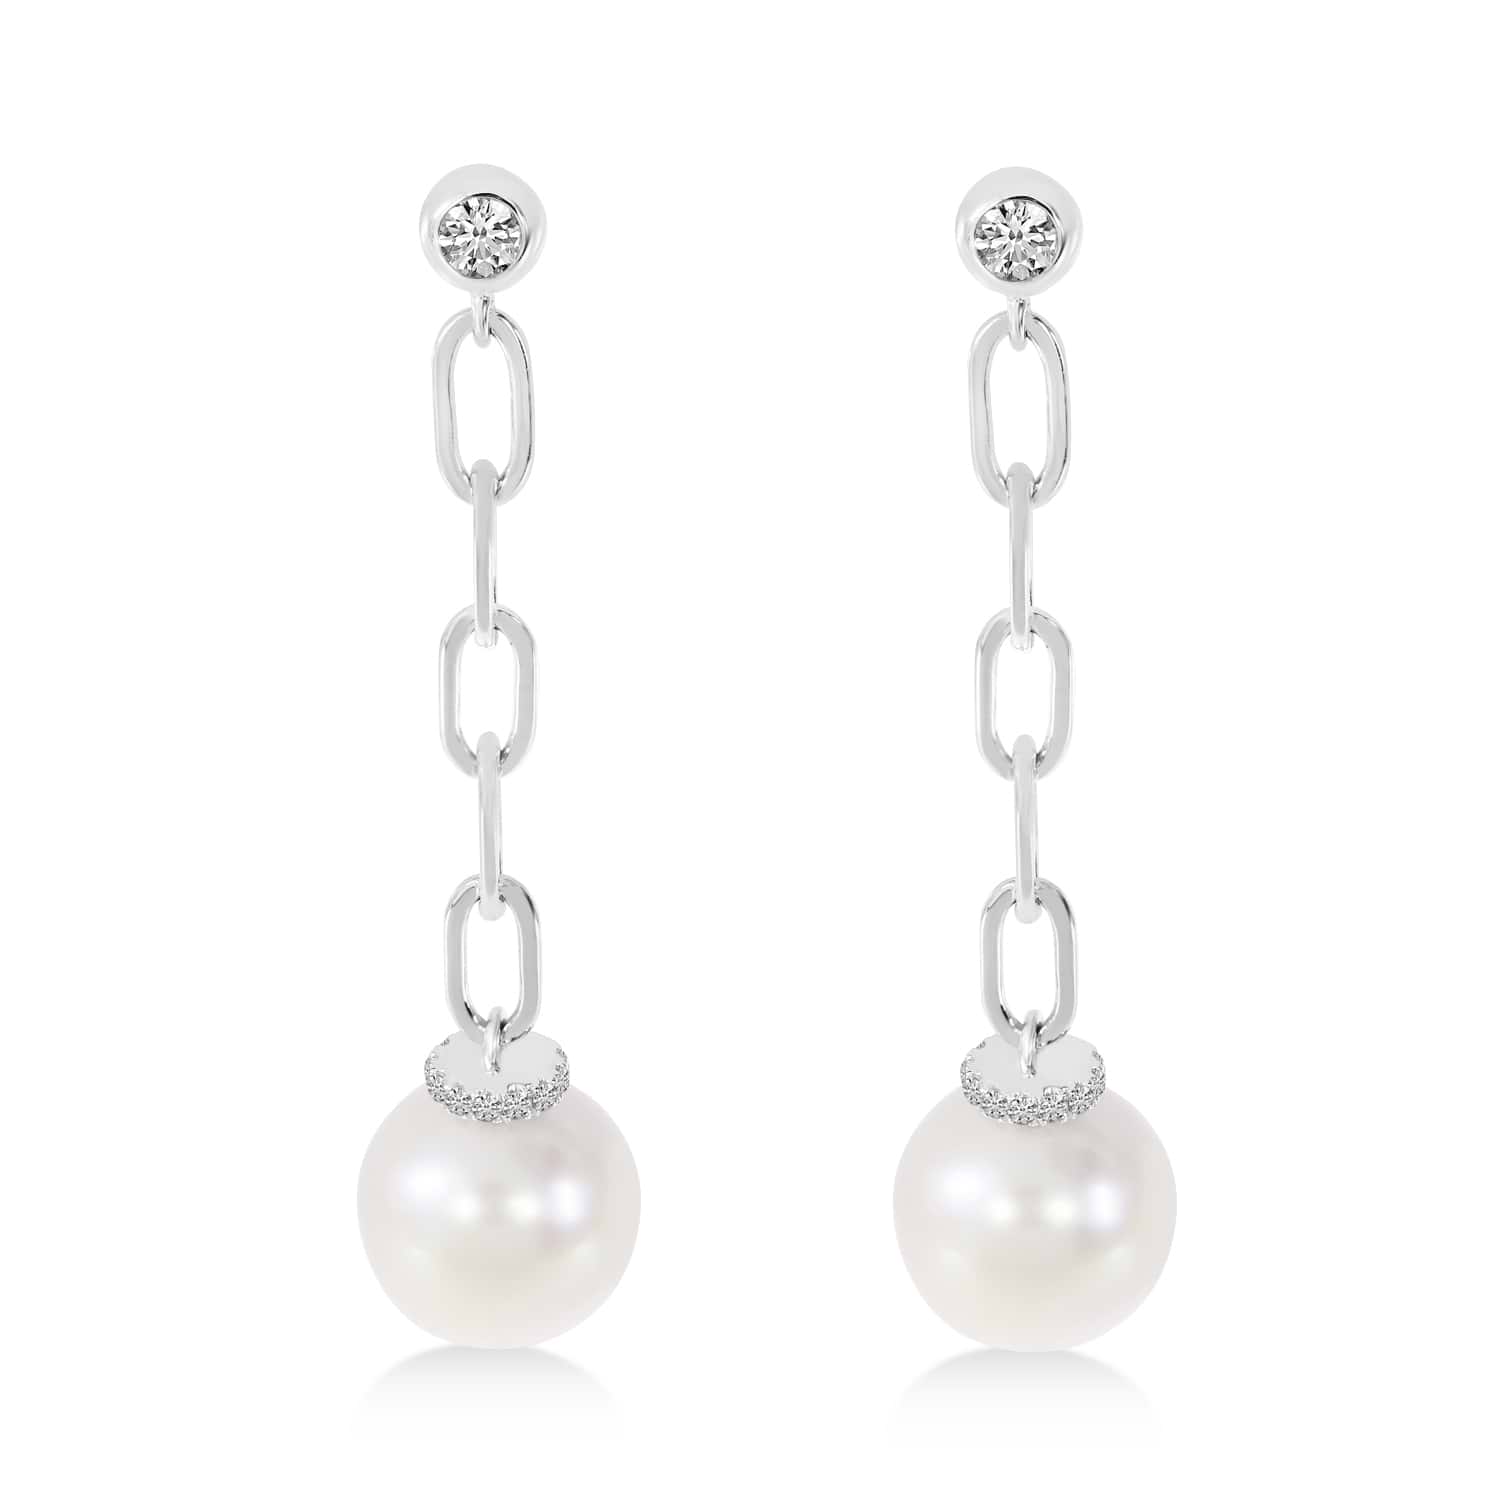 Diamond & Pearl Paperclip Link Earrings 14k White Gold (0.15ct)